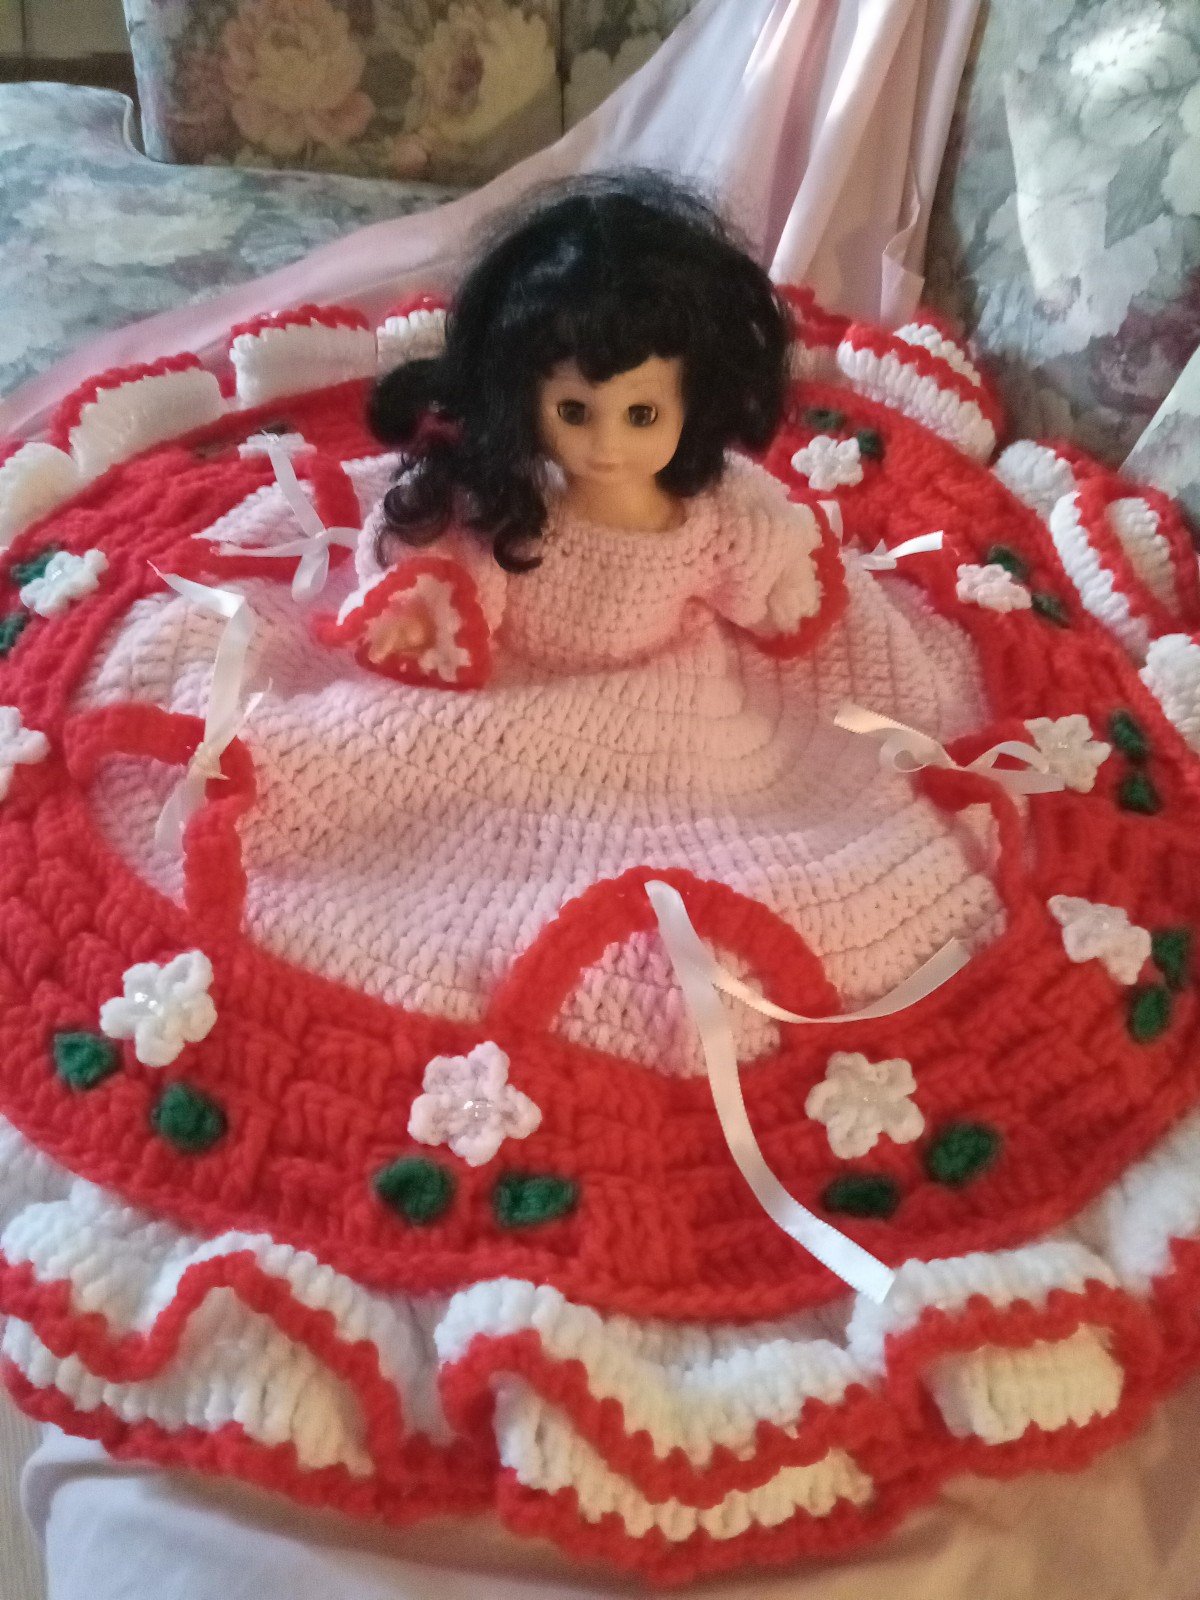 Crocheted  bed topper doll FZyf3Qtra